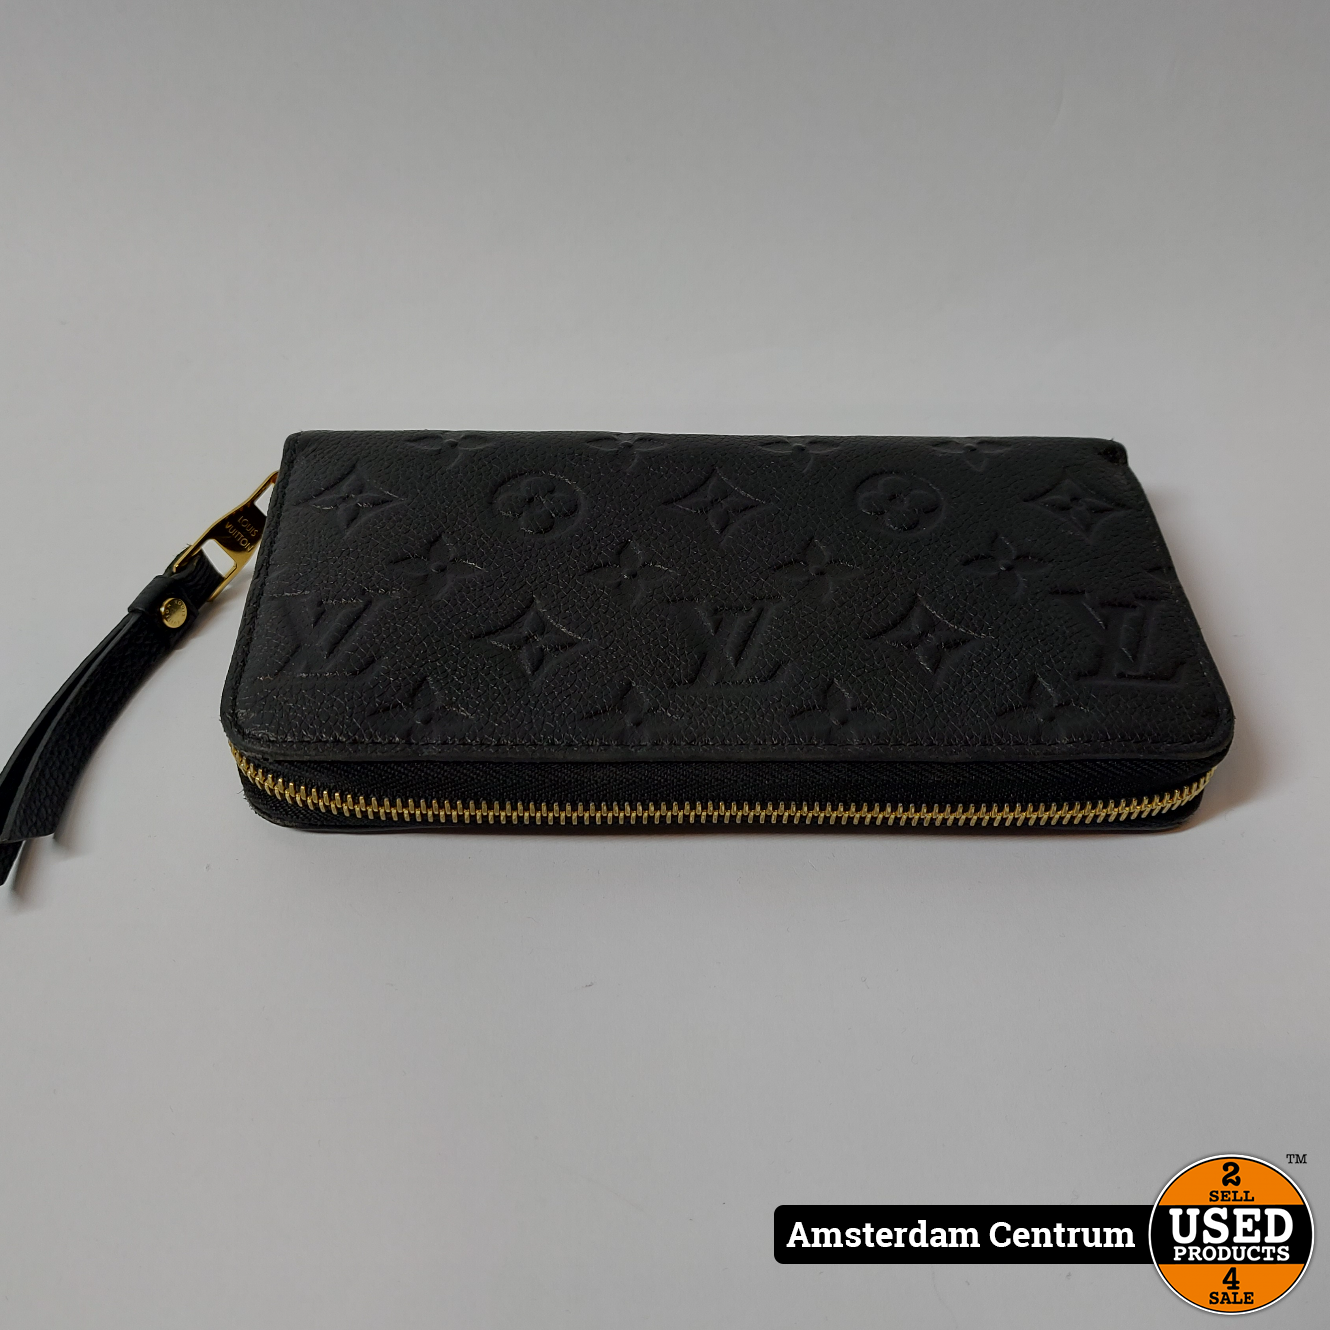 Products By Louis Vuitton: Lv Crafty Zoé Wallet